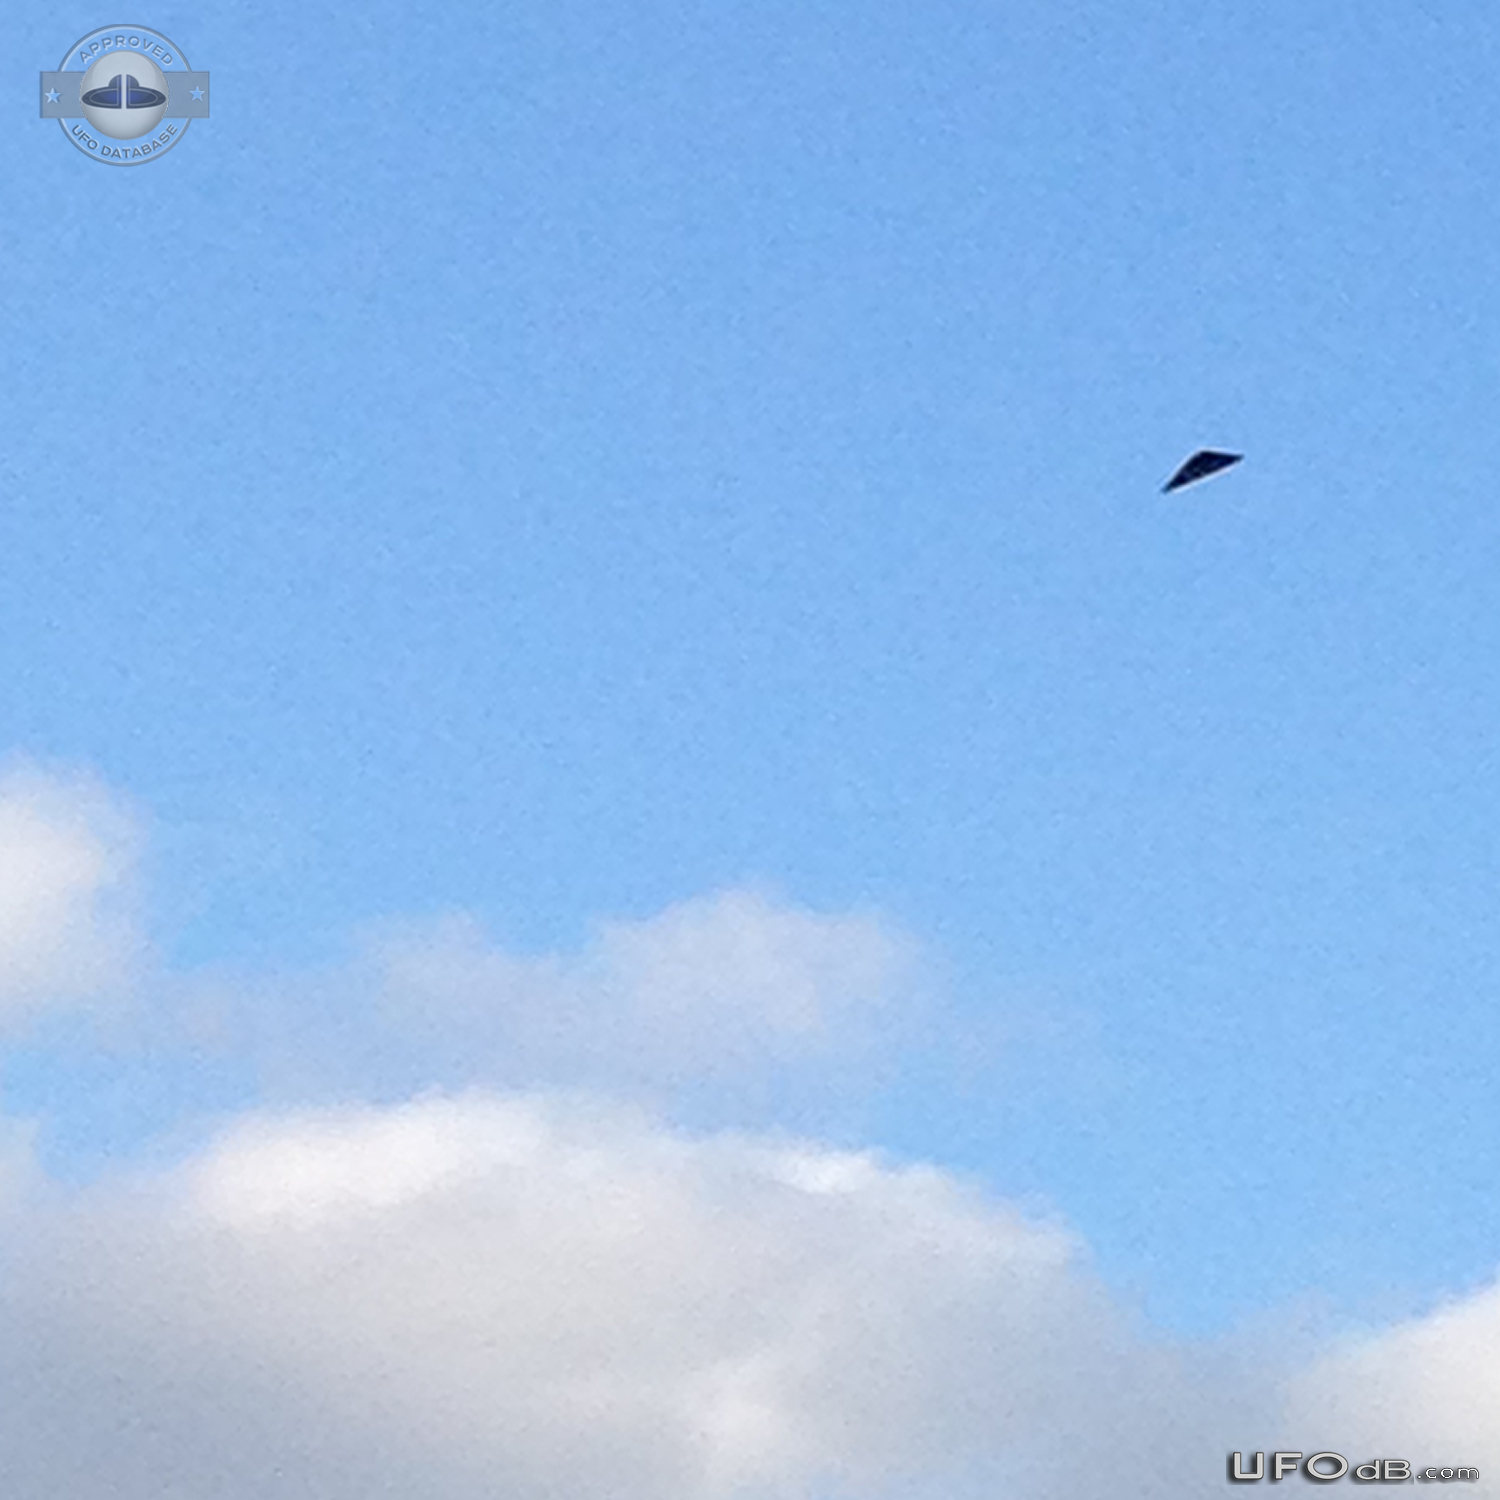 Triangular object hovering in Sky and did not move while observed - Au UFO Picture #736-4